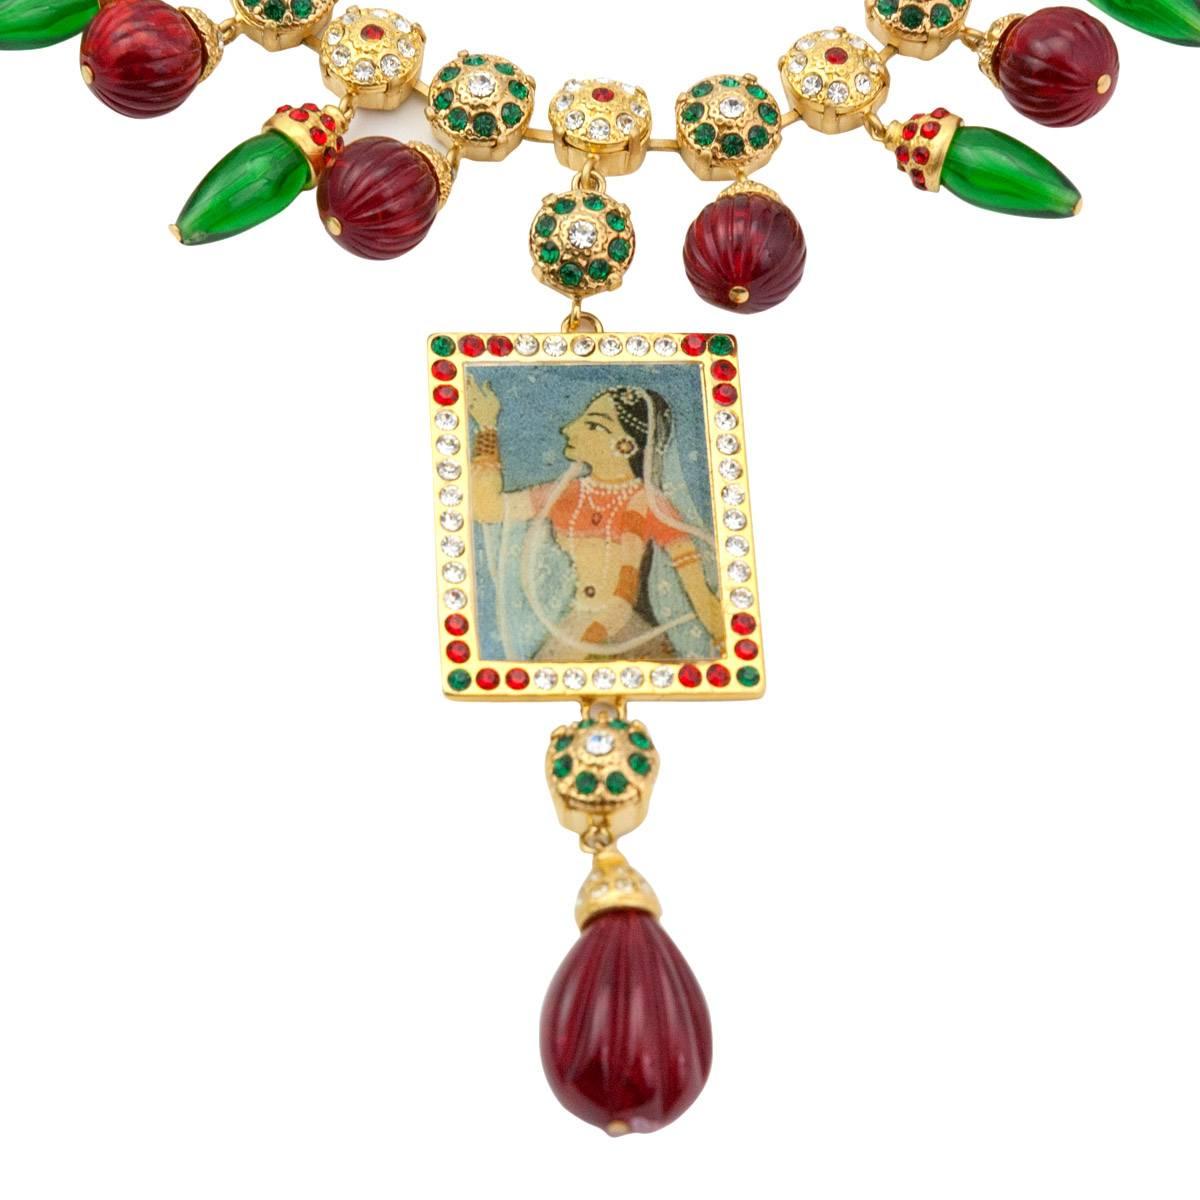 Very origina Carlo Zini necklace
India inspired
Golden brass
Swarovsky crystals
Imitation of emerald and ruby
Small red and green rhinestones
Made in Italy 
Worldwide express shipping included in the price !